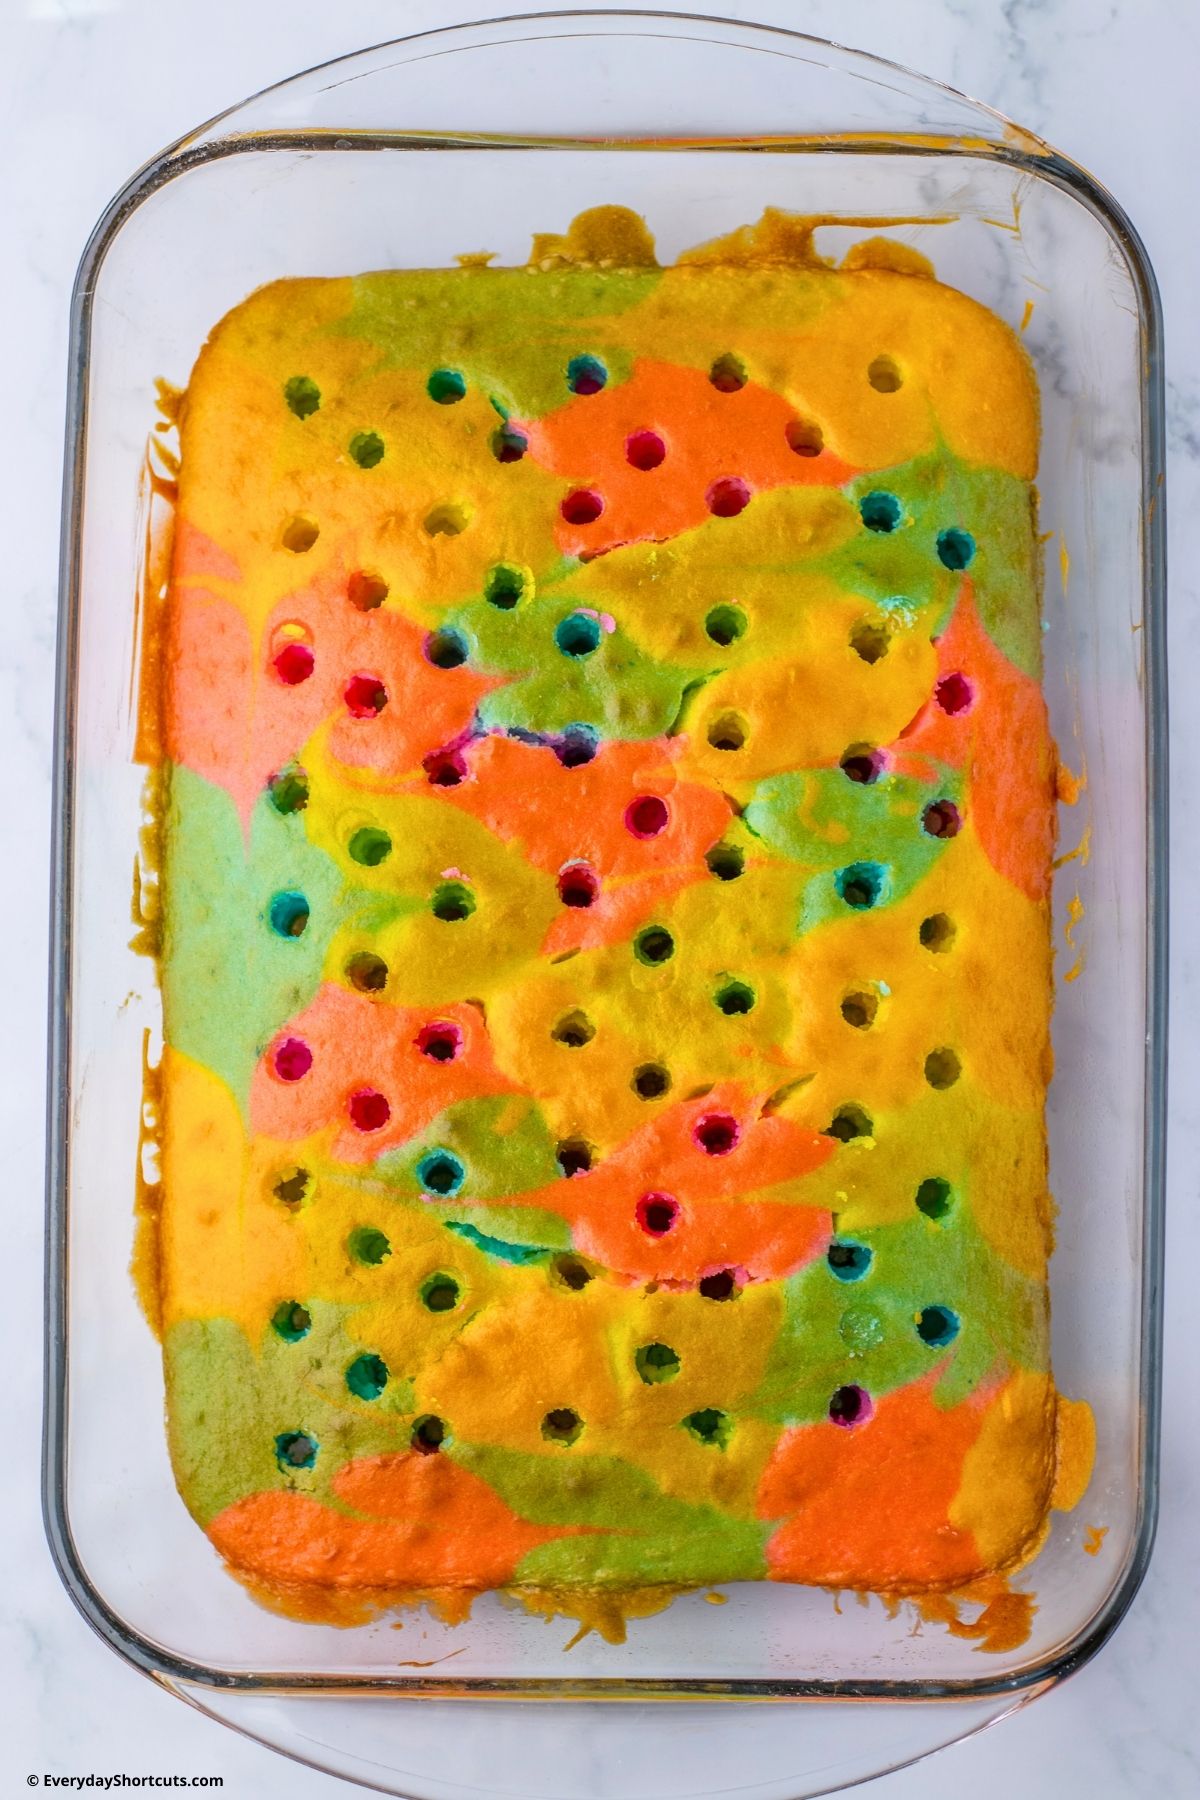 holes poked in cake batter